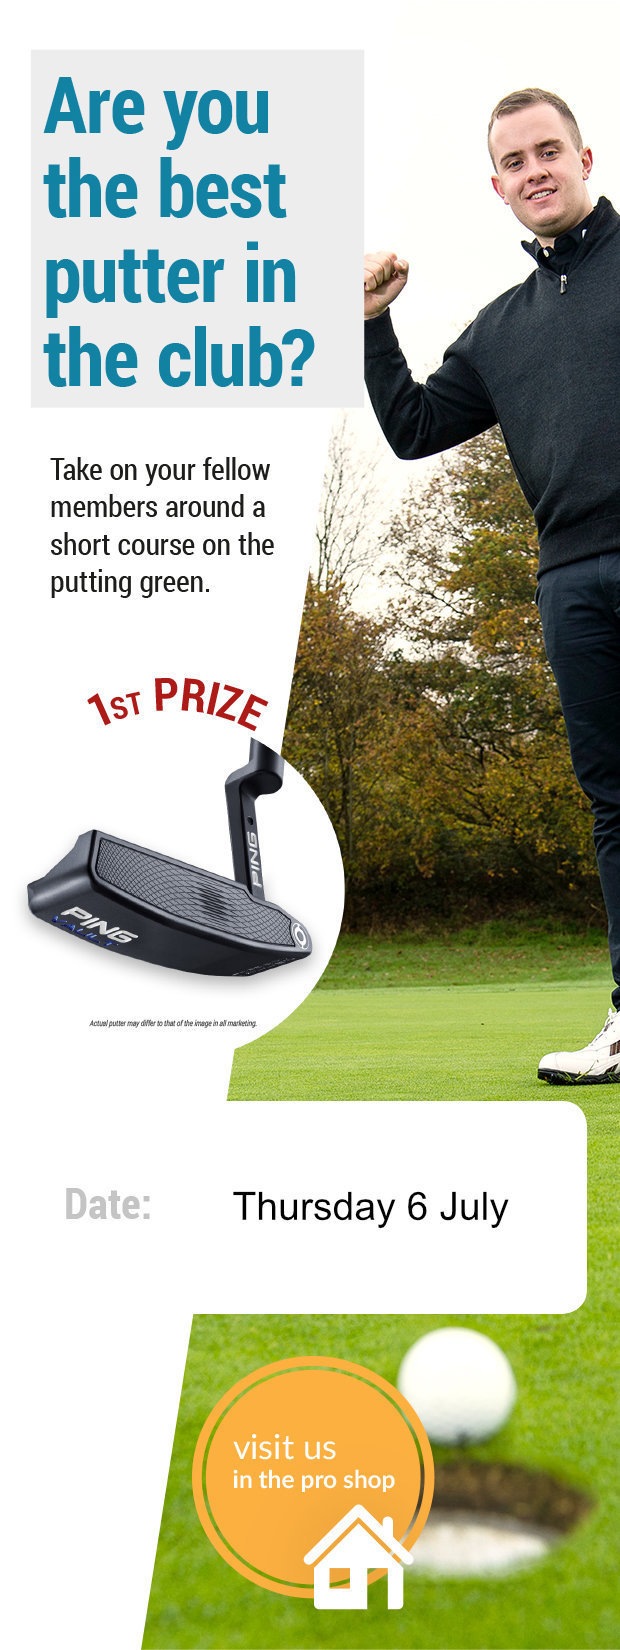 Prove you're the best and win a PING putter!